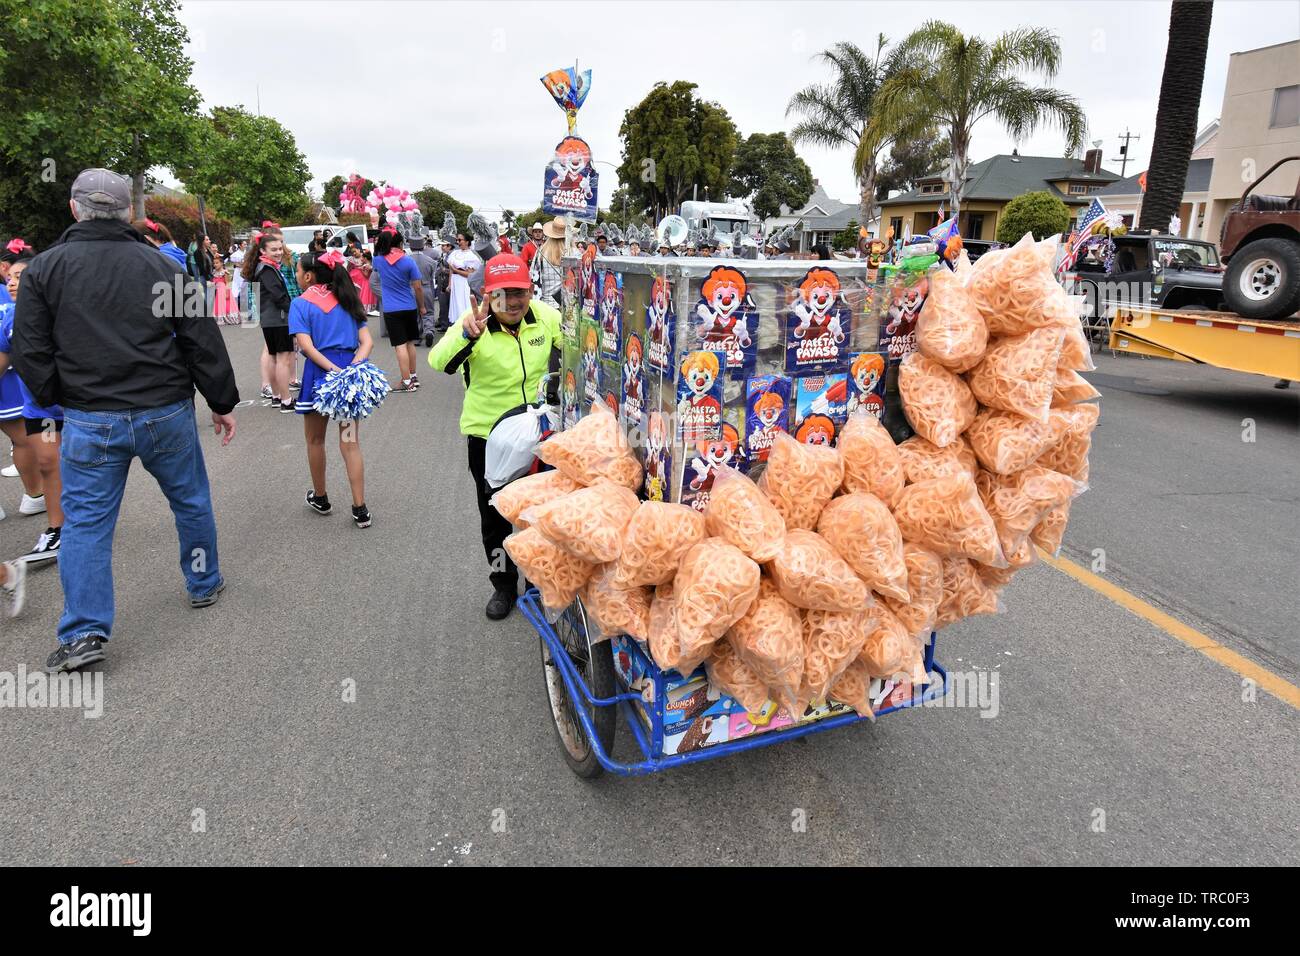 Senior Street vendor selling real Mexican Latin type of  snacks to parade participants and goers before start in California USA America Stock Photo